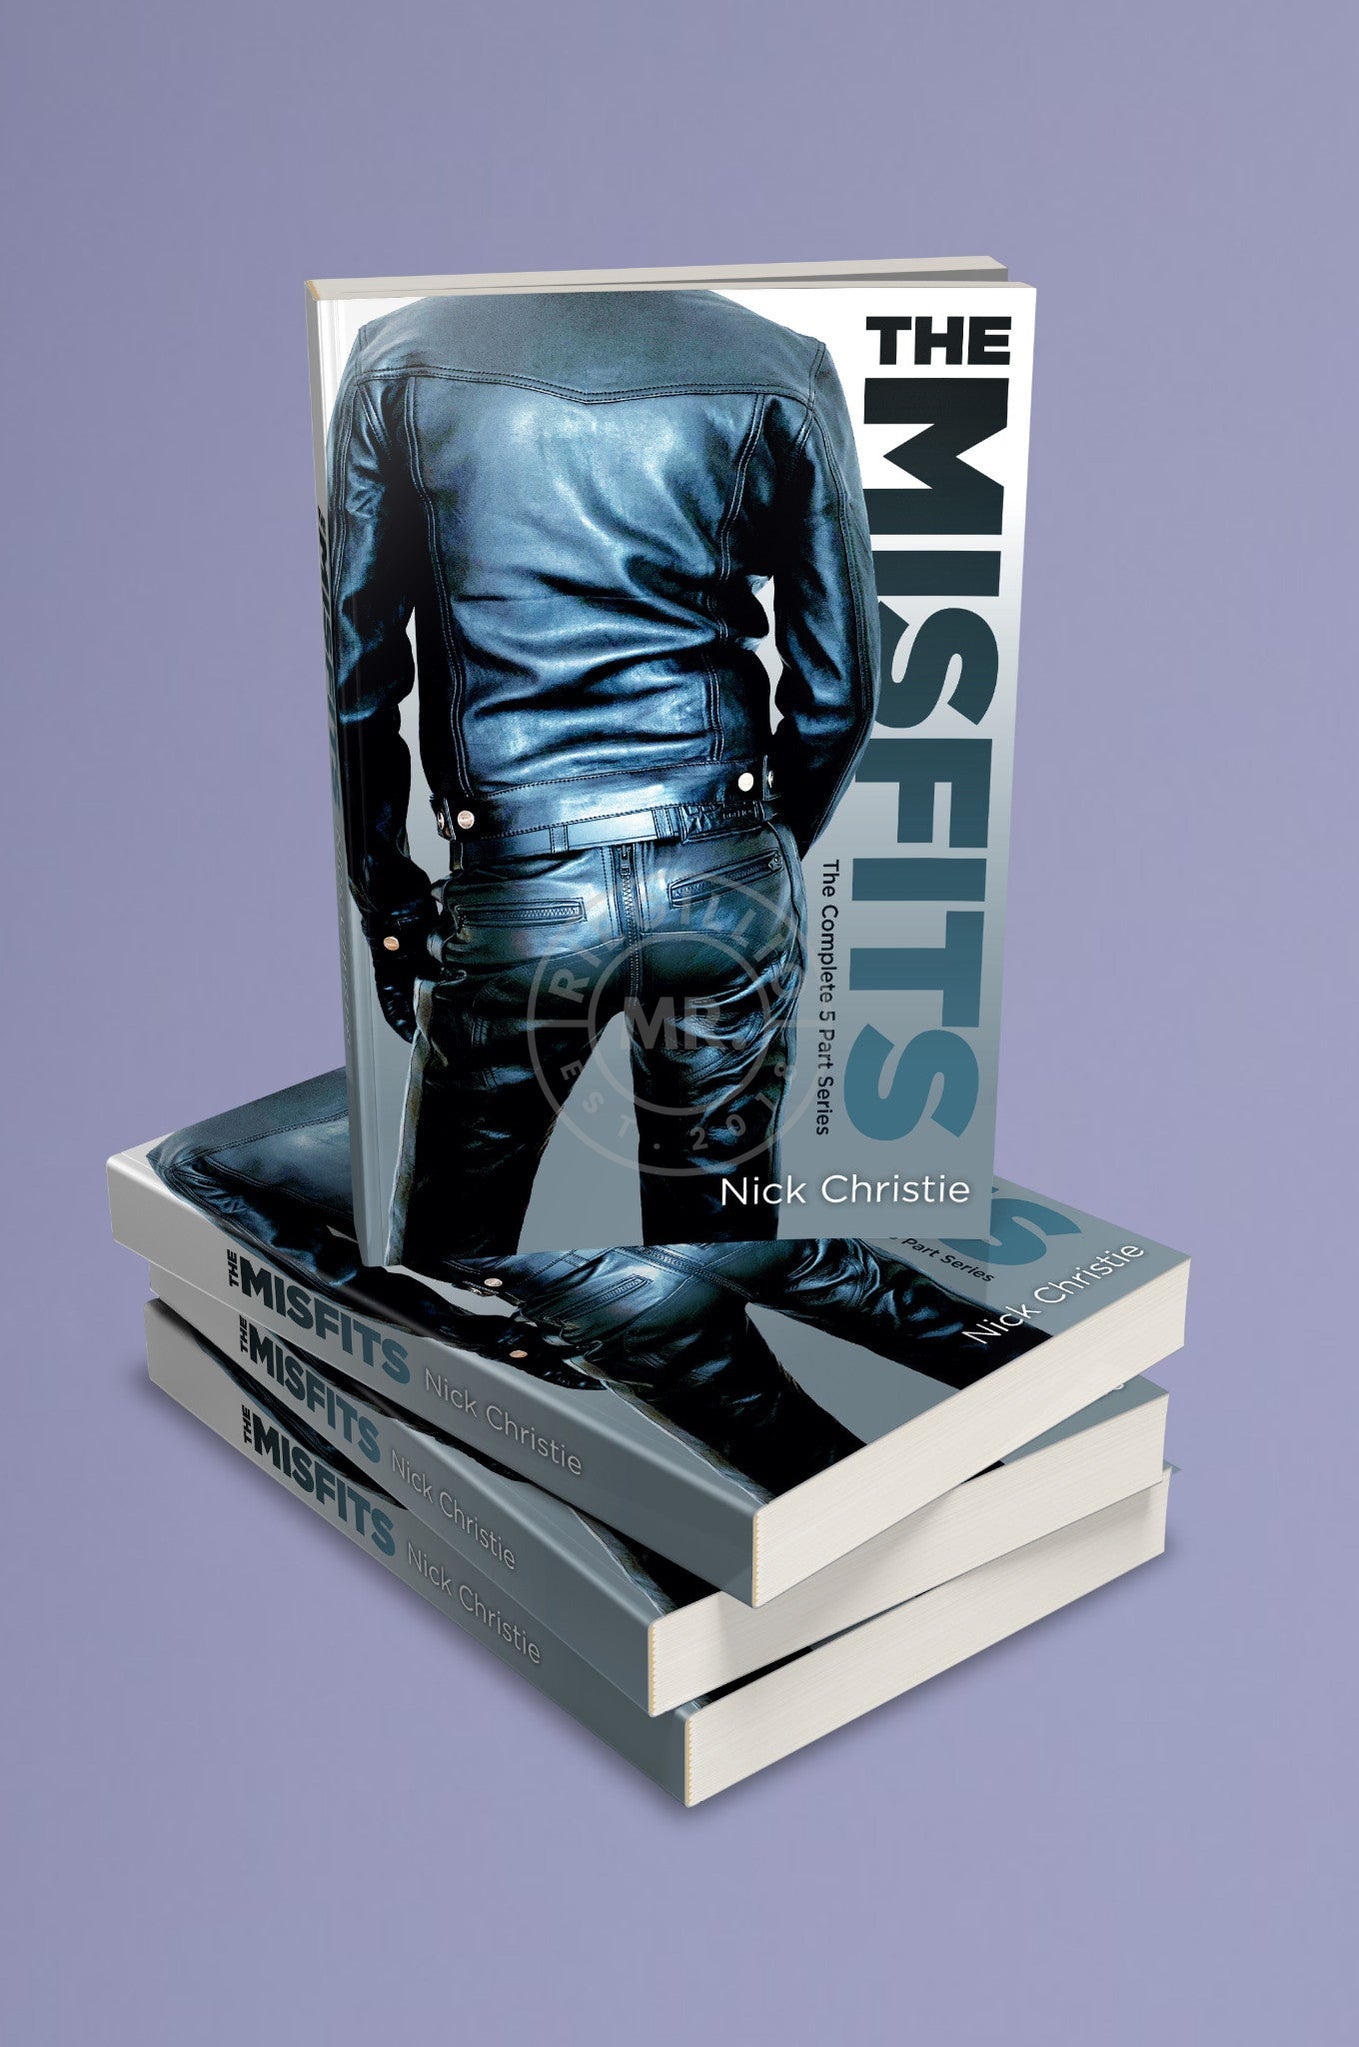 The Misfits - Complete 5 Part Book Series by Nick Christie-at MR. Riegillio